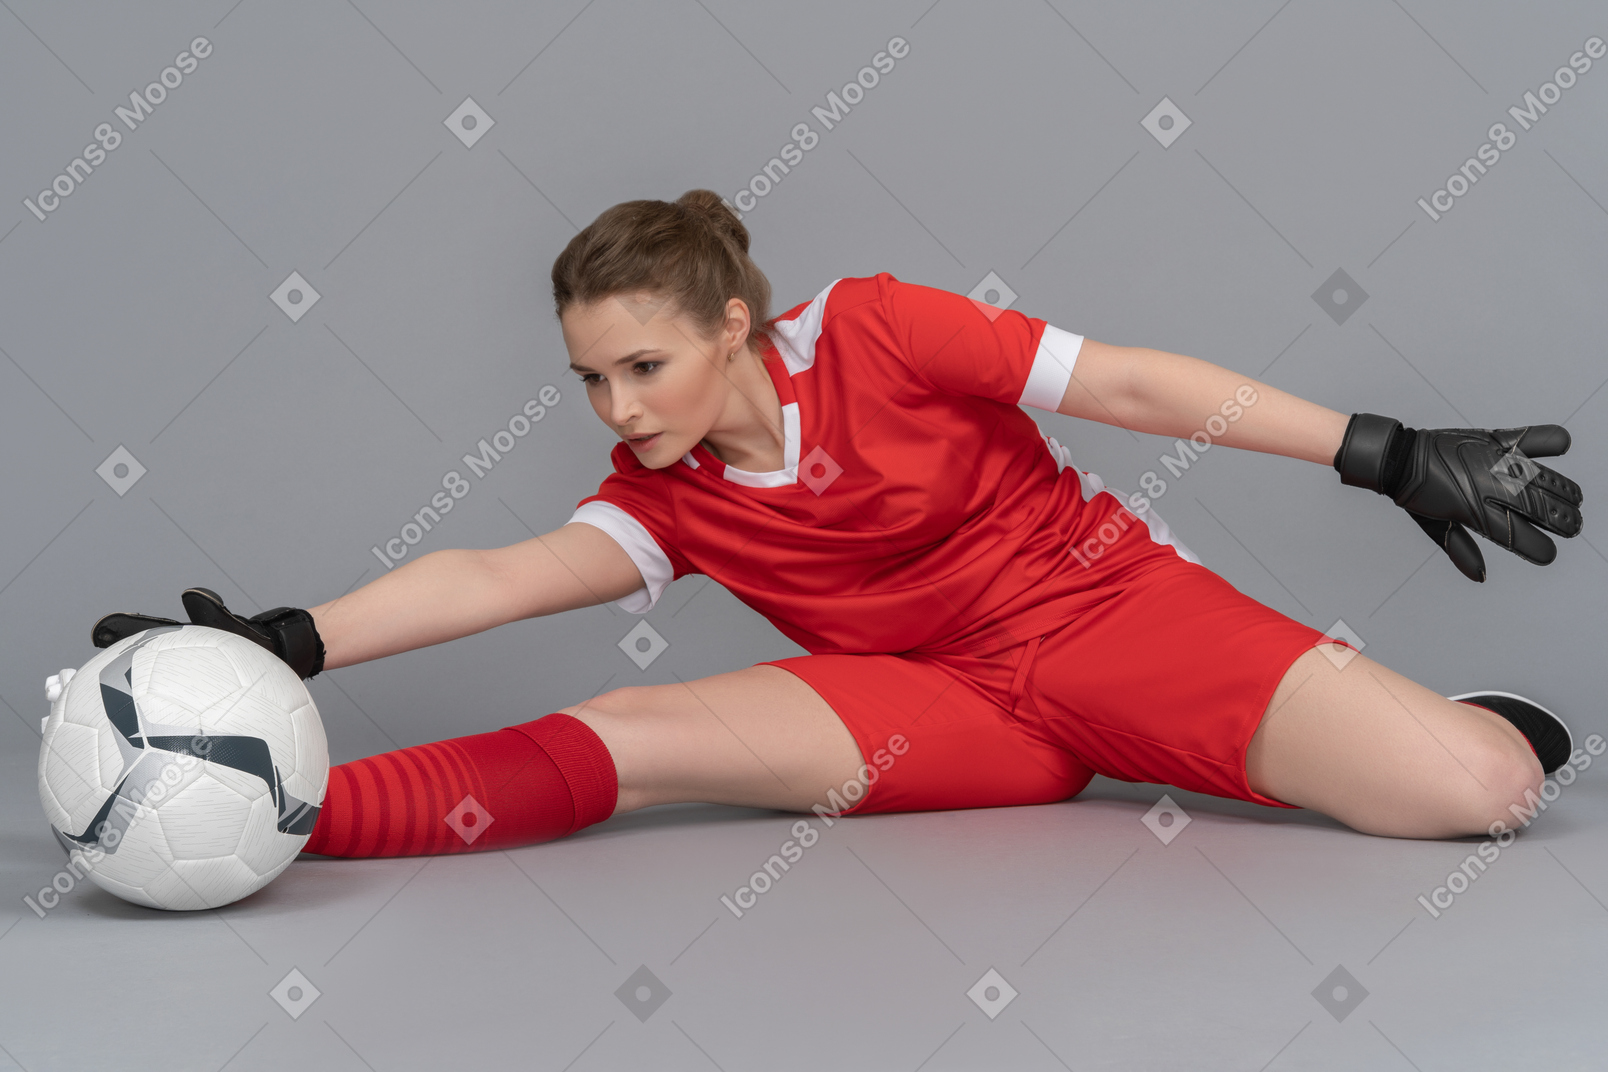 Stretching exercises for football